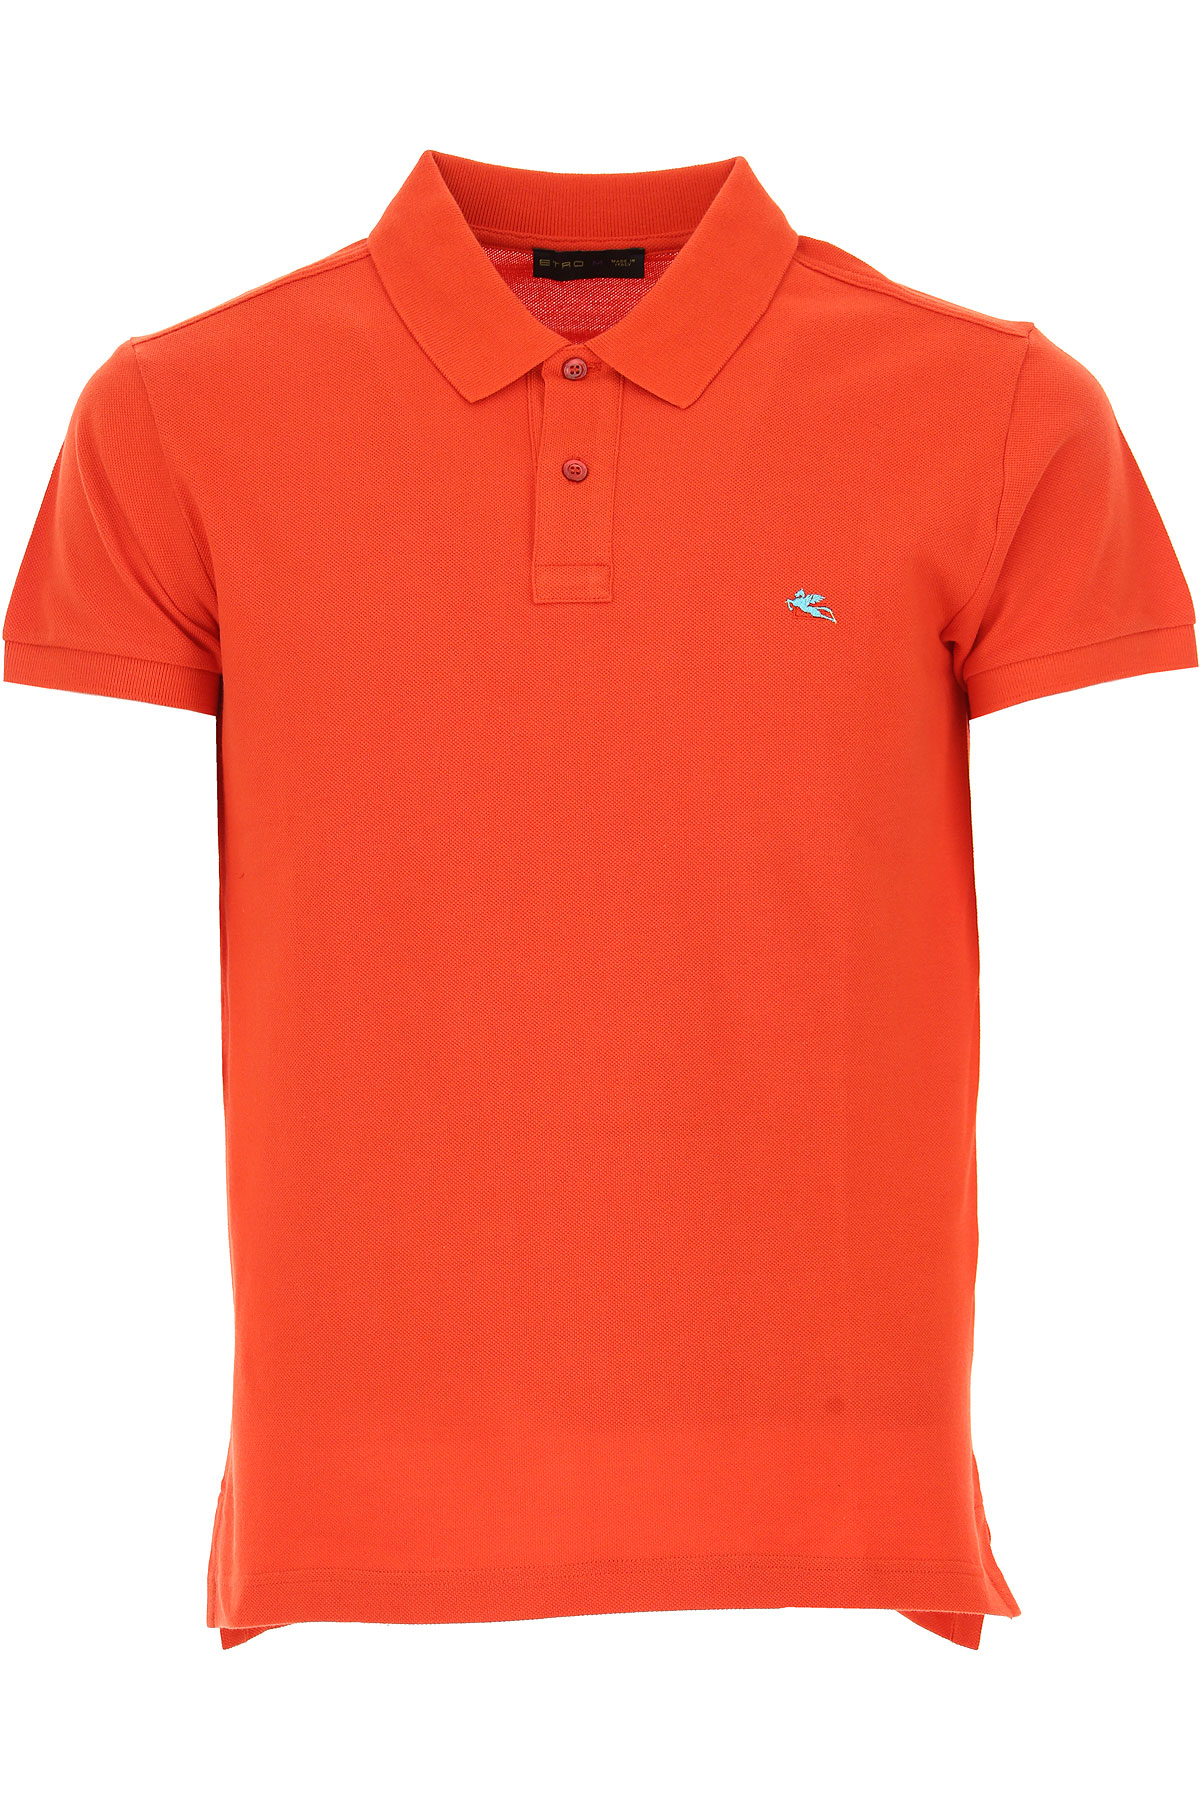 Etro Polo Homme Outlet, Rouge, Coton, 2017, M S